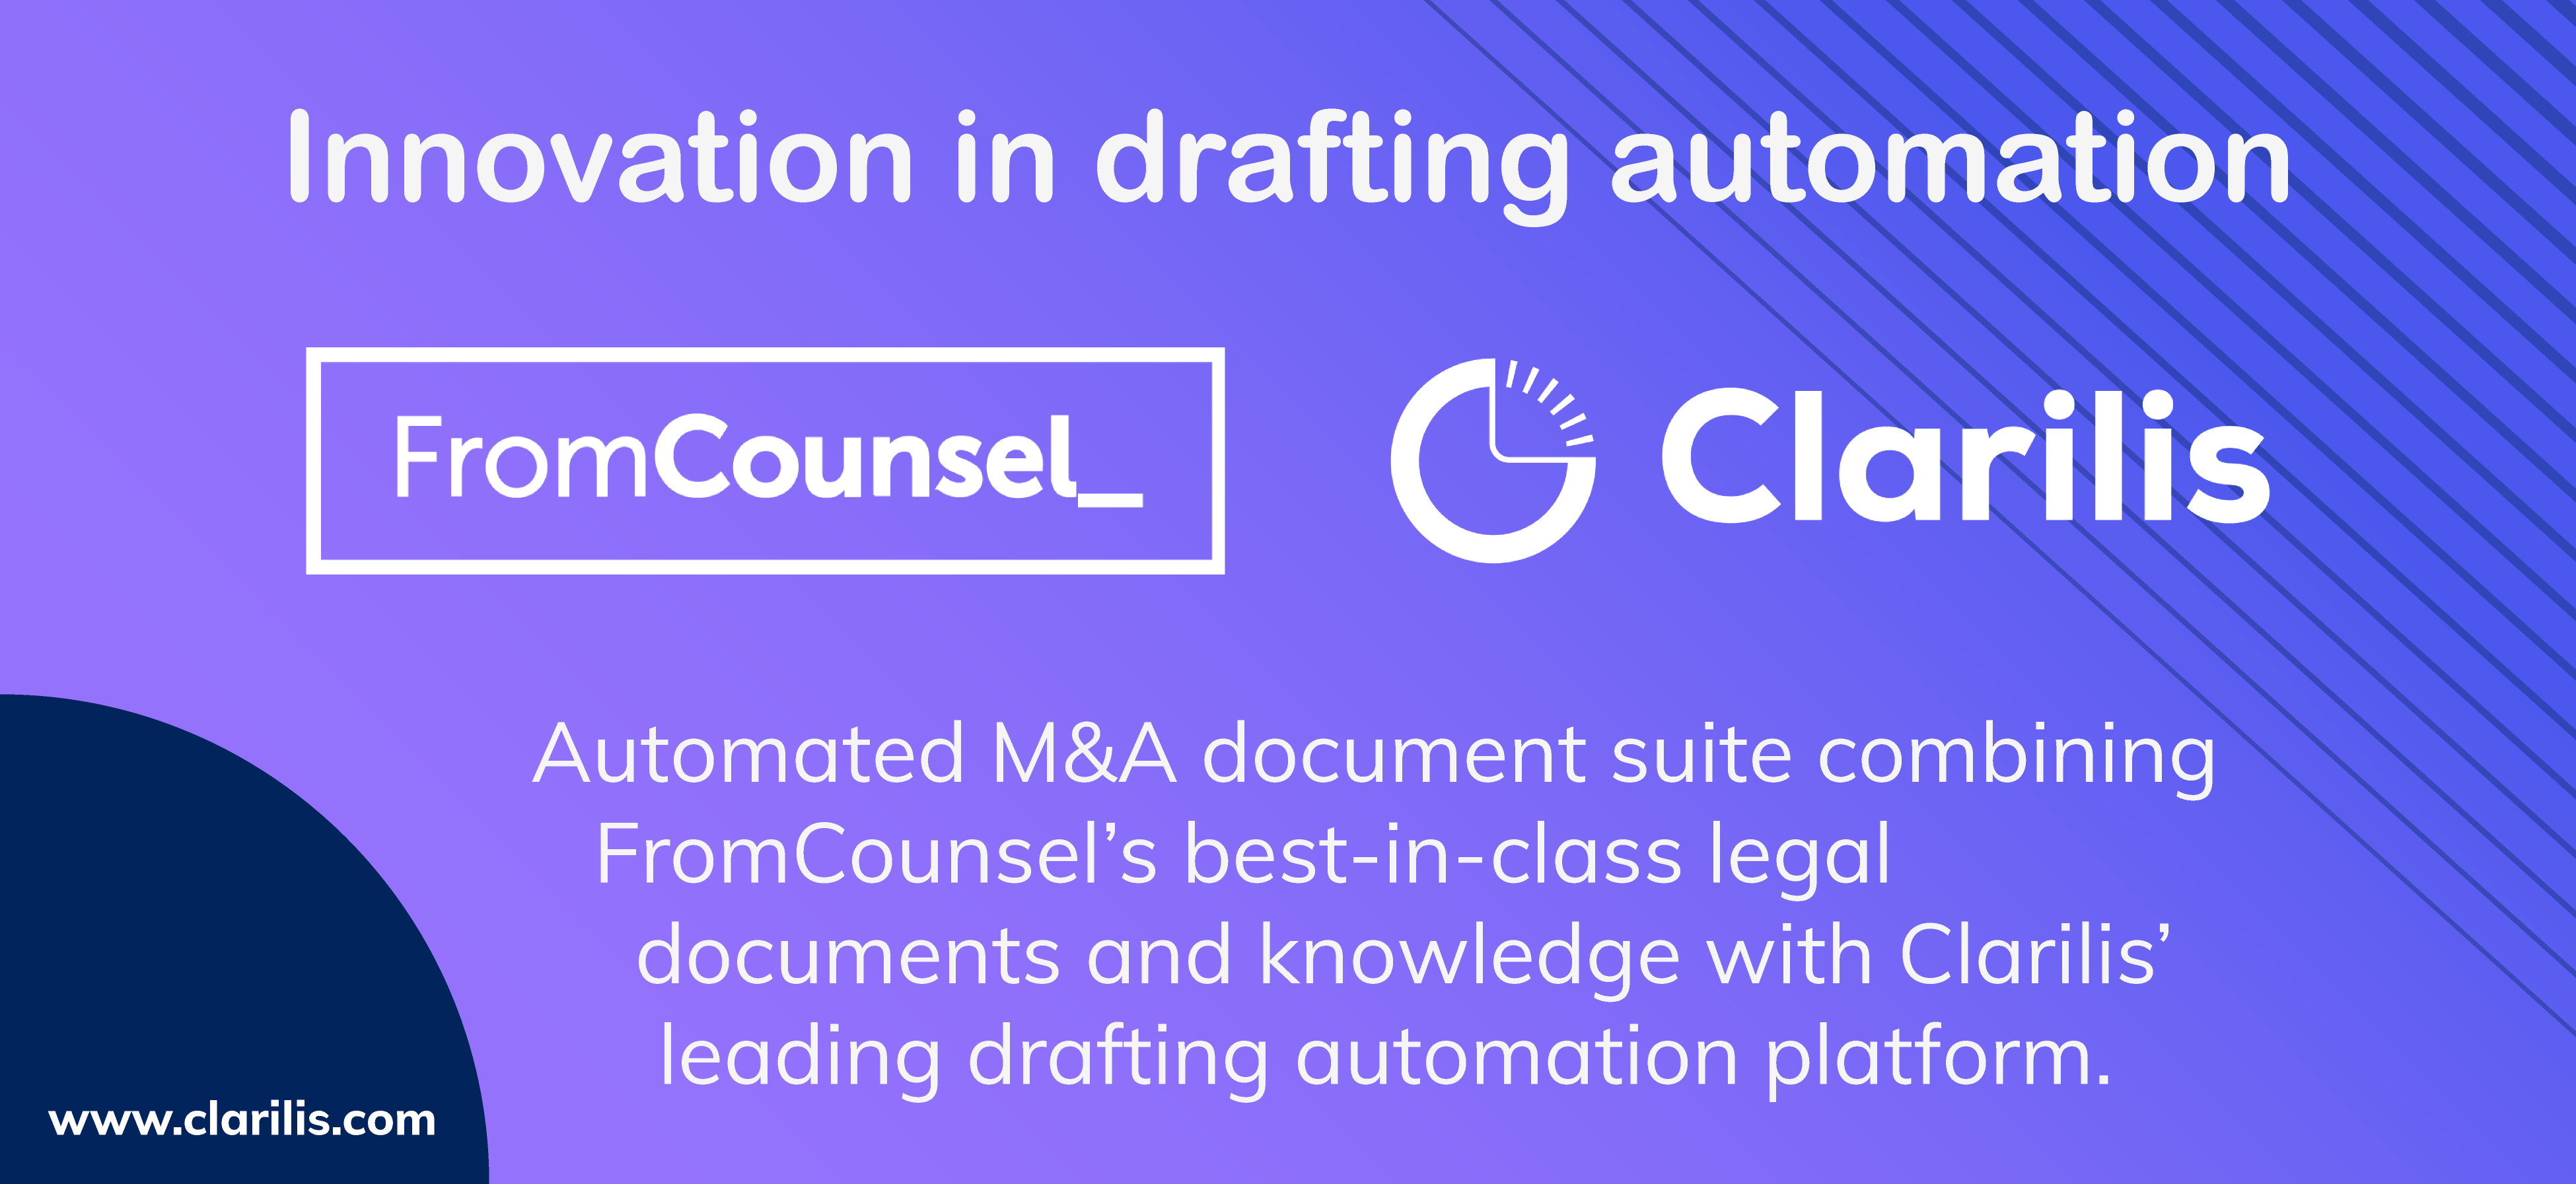 Innovation in drafting automation: Clarilis and FromCounsel partnership